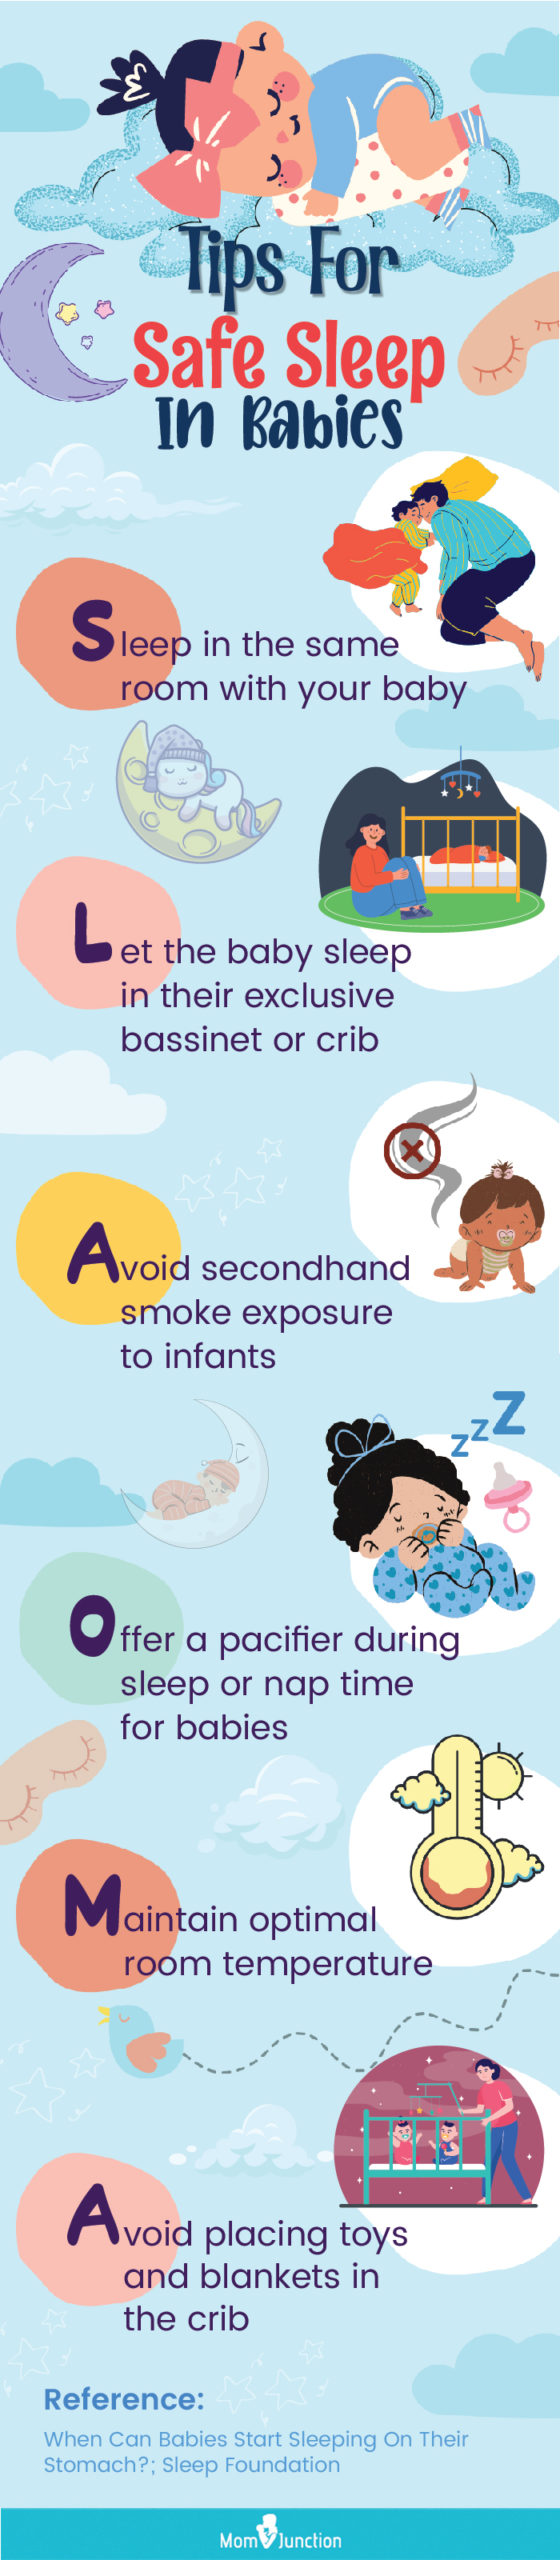 tips for safe sleep in babies (infographic)